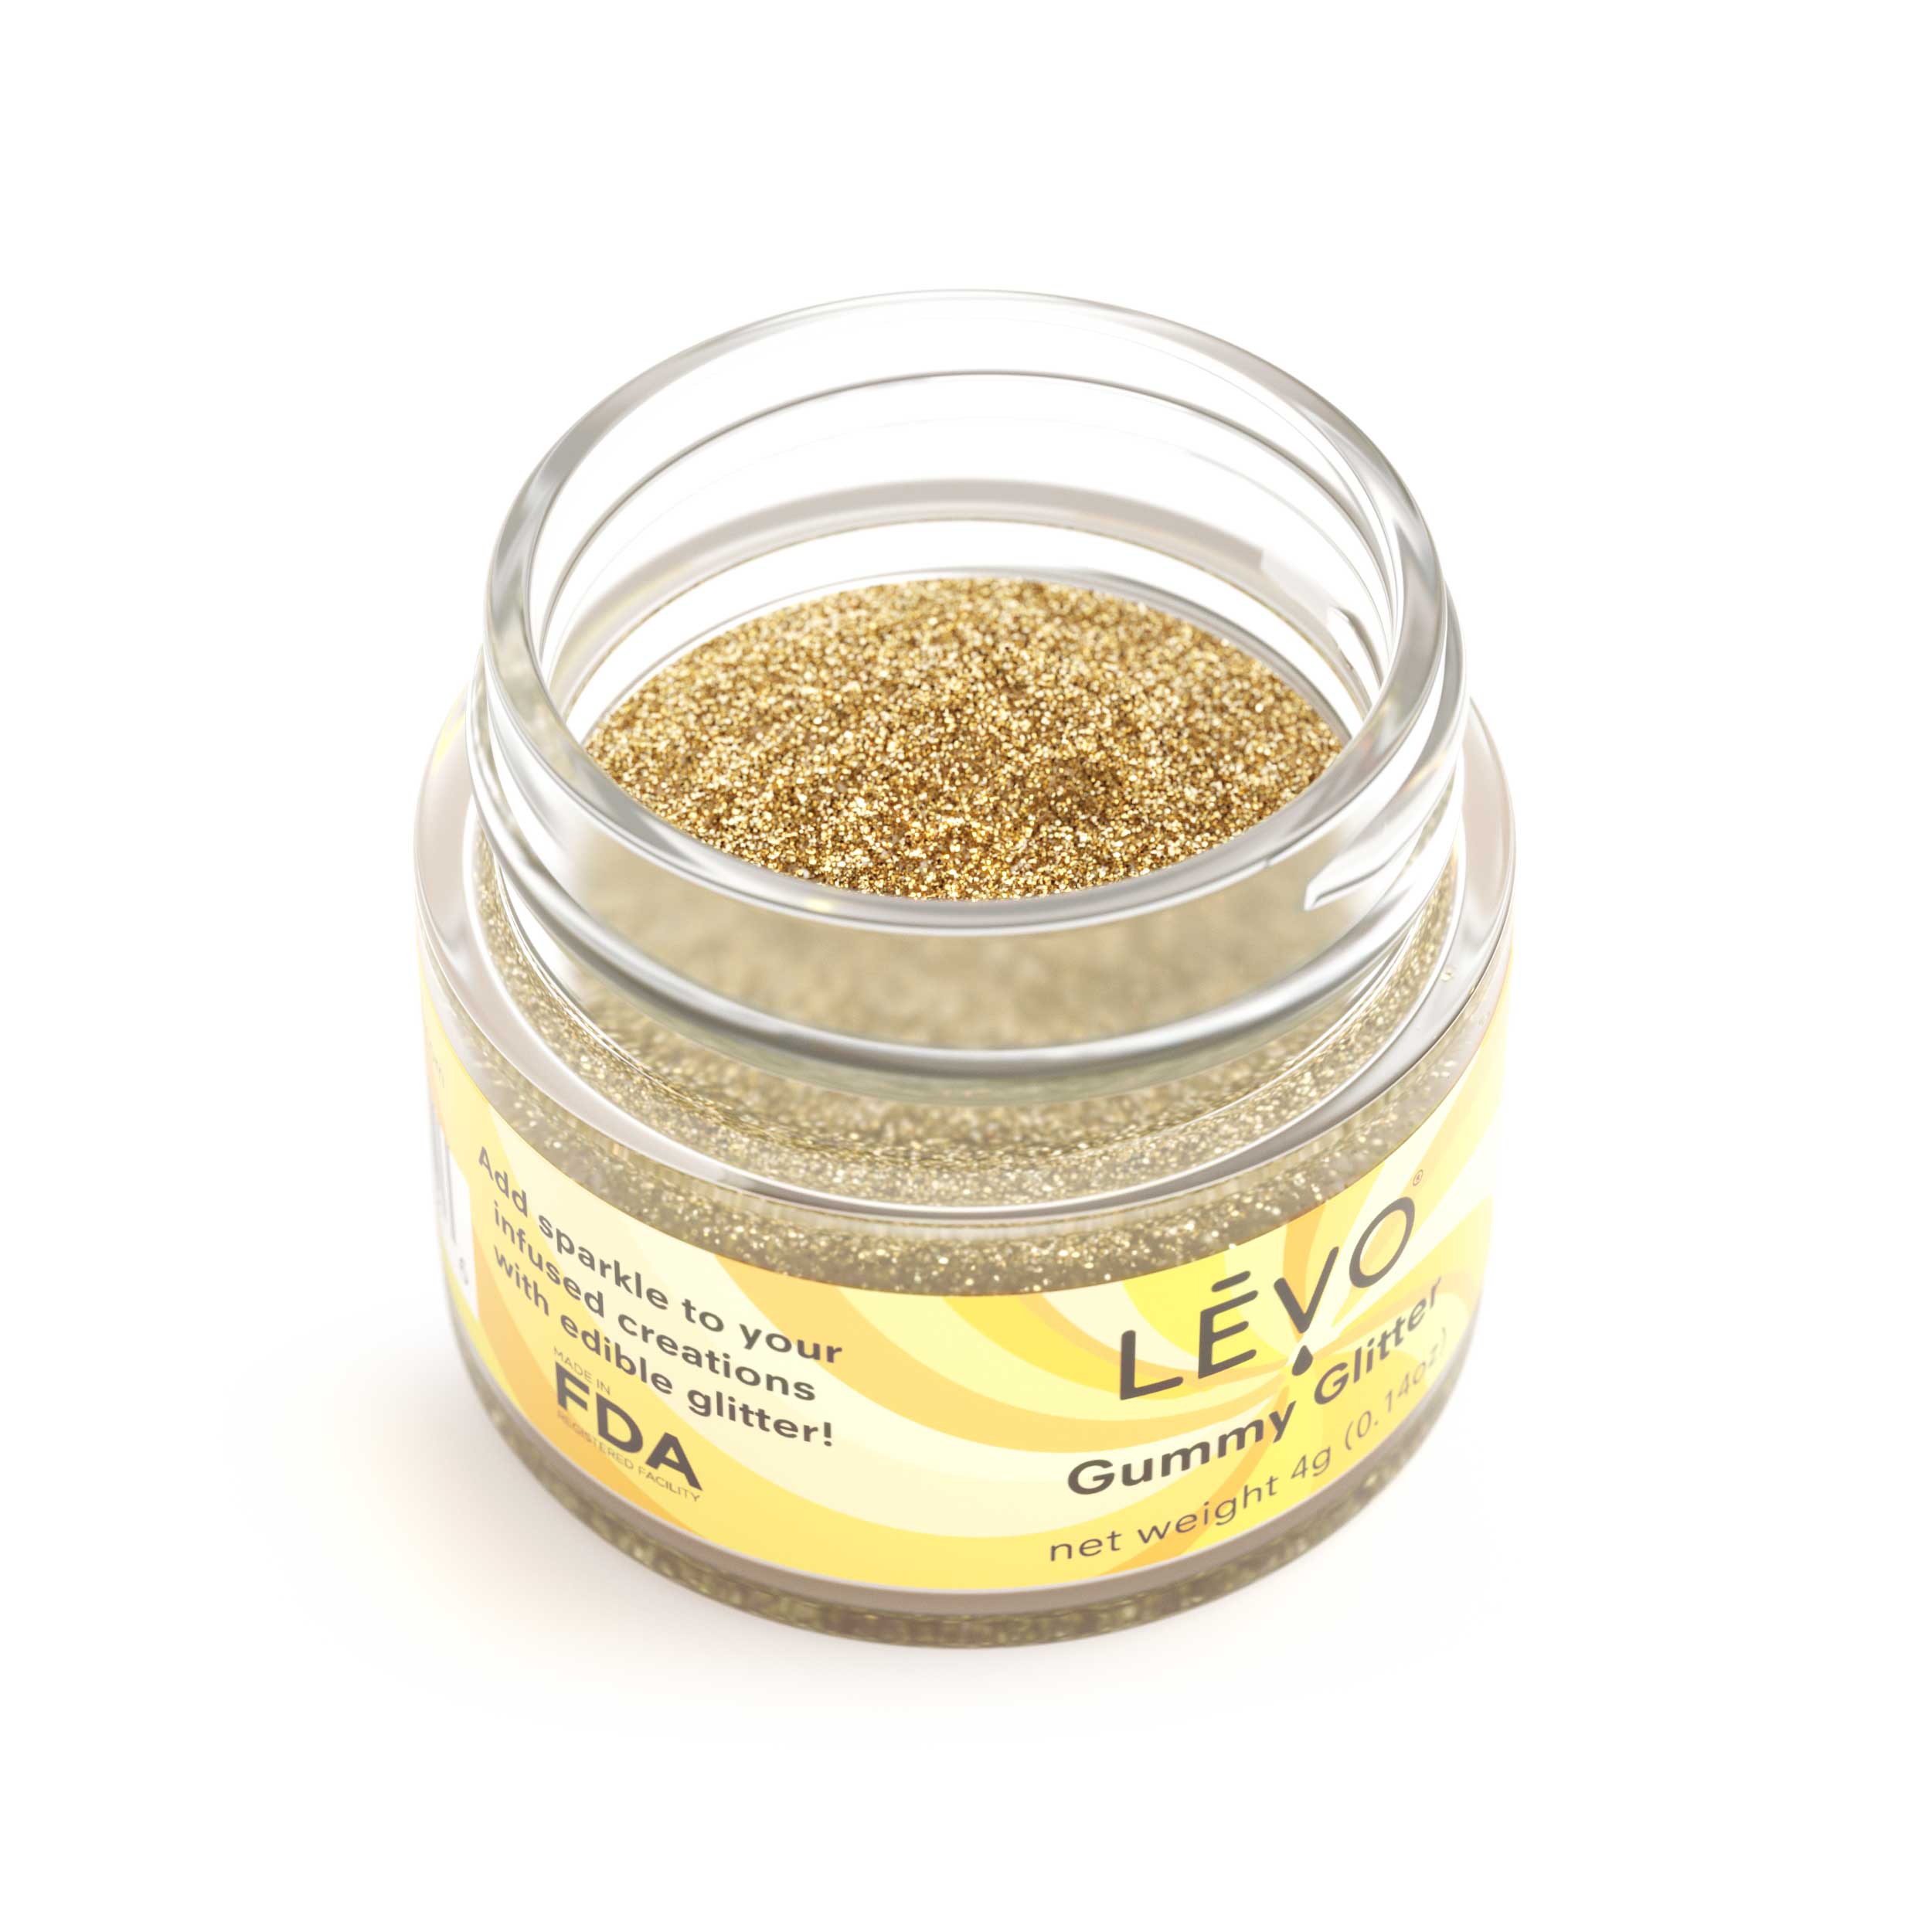 LEVO Gold Gummy Glitter made in an FDA approved facility, made in the USA. Add gold glitter to your infused gummies, dust your chocolate covered strawberries, or top your cupcakes.